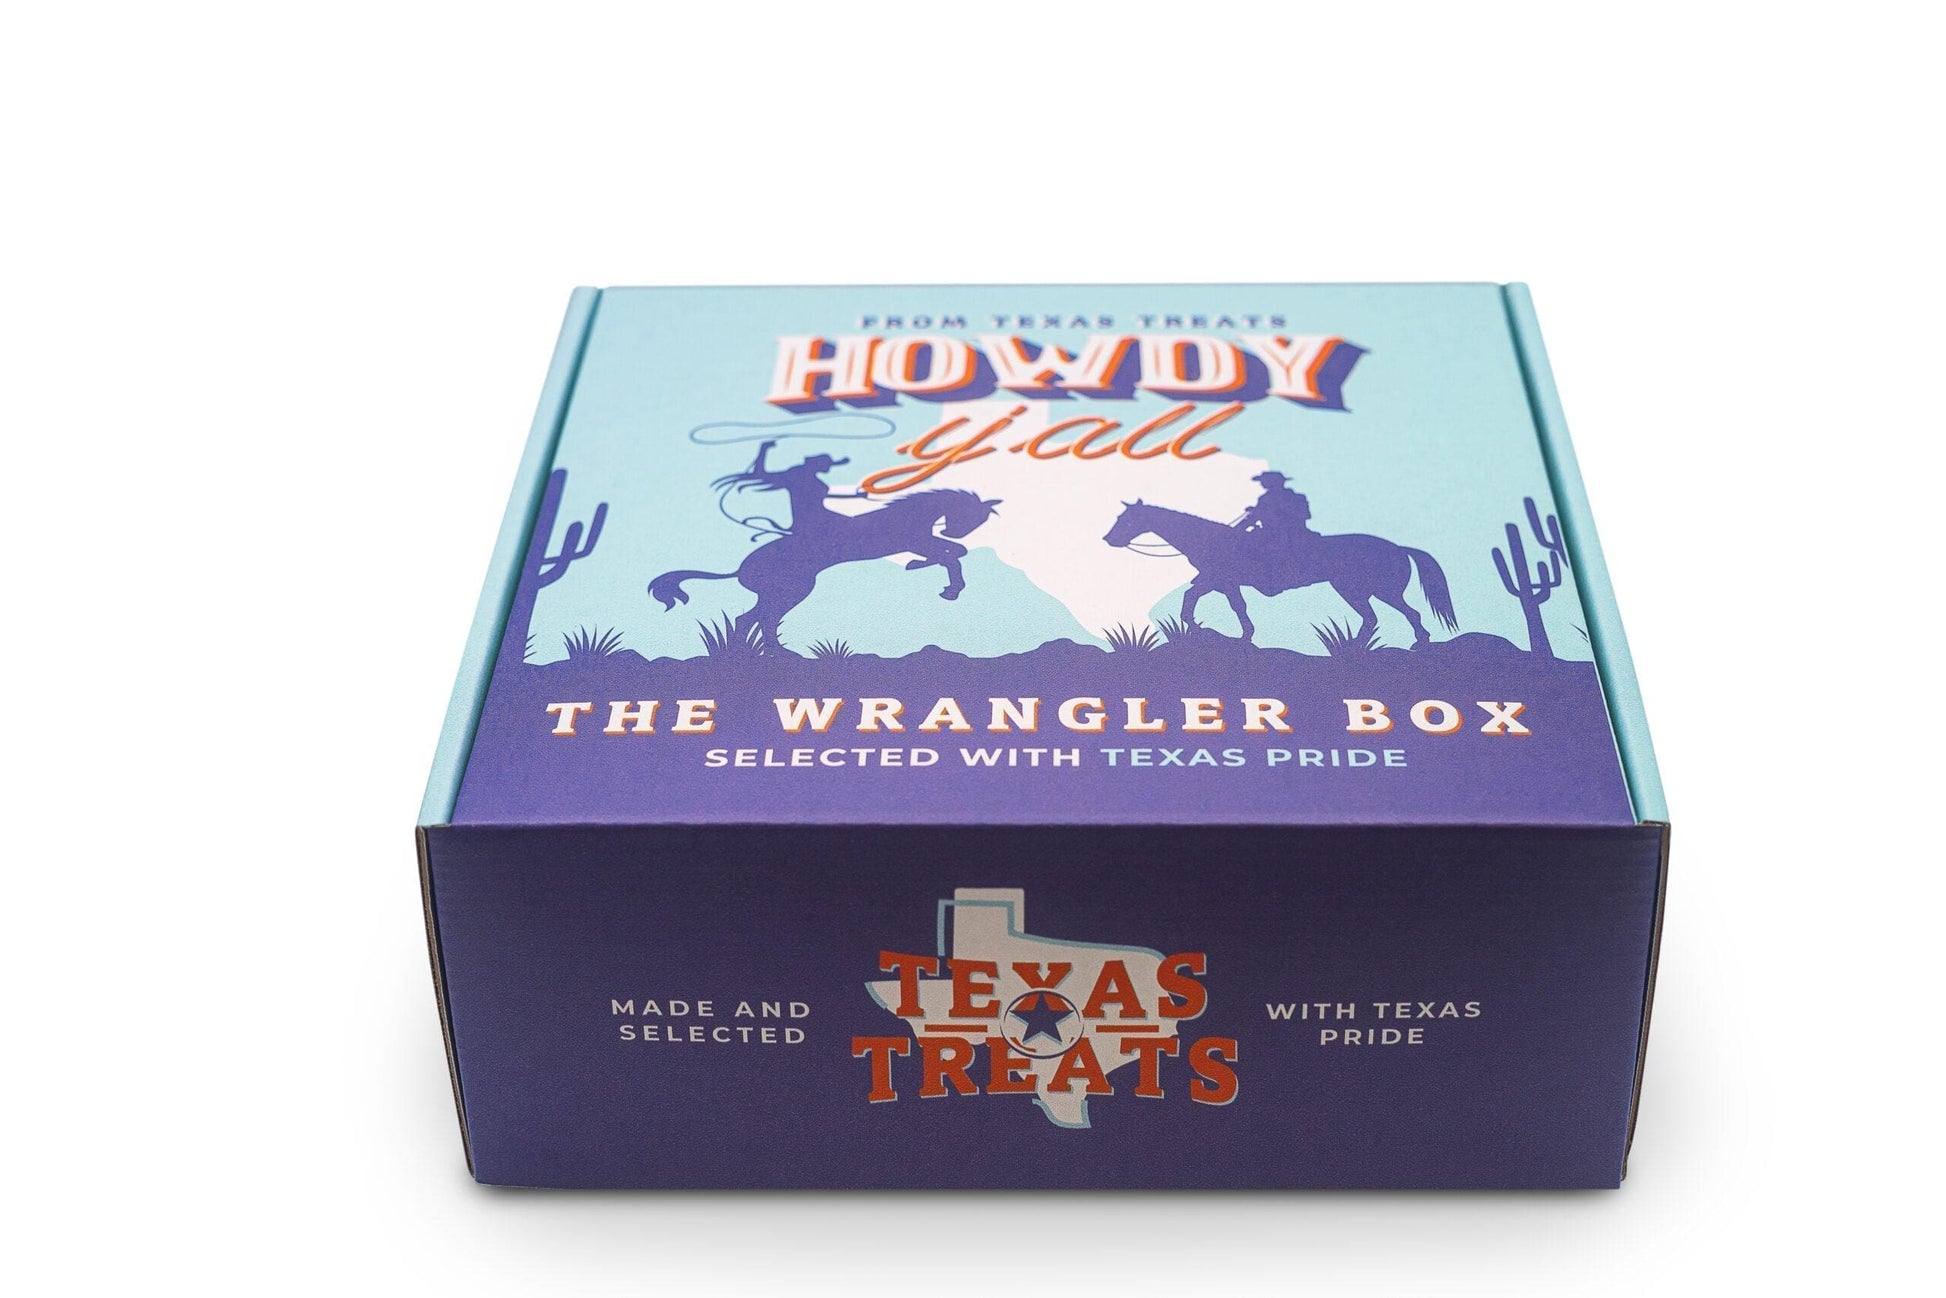 Texas Treats' Wrangler box – available for personal and corporate gifting.